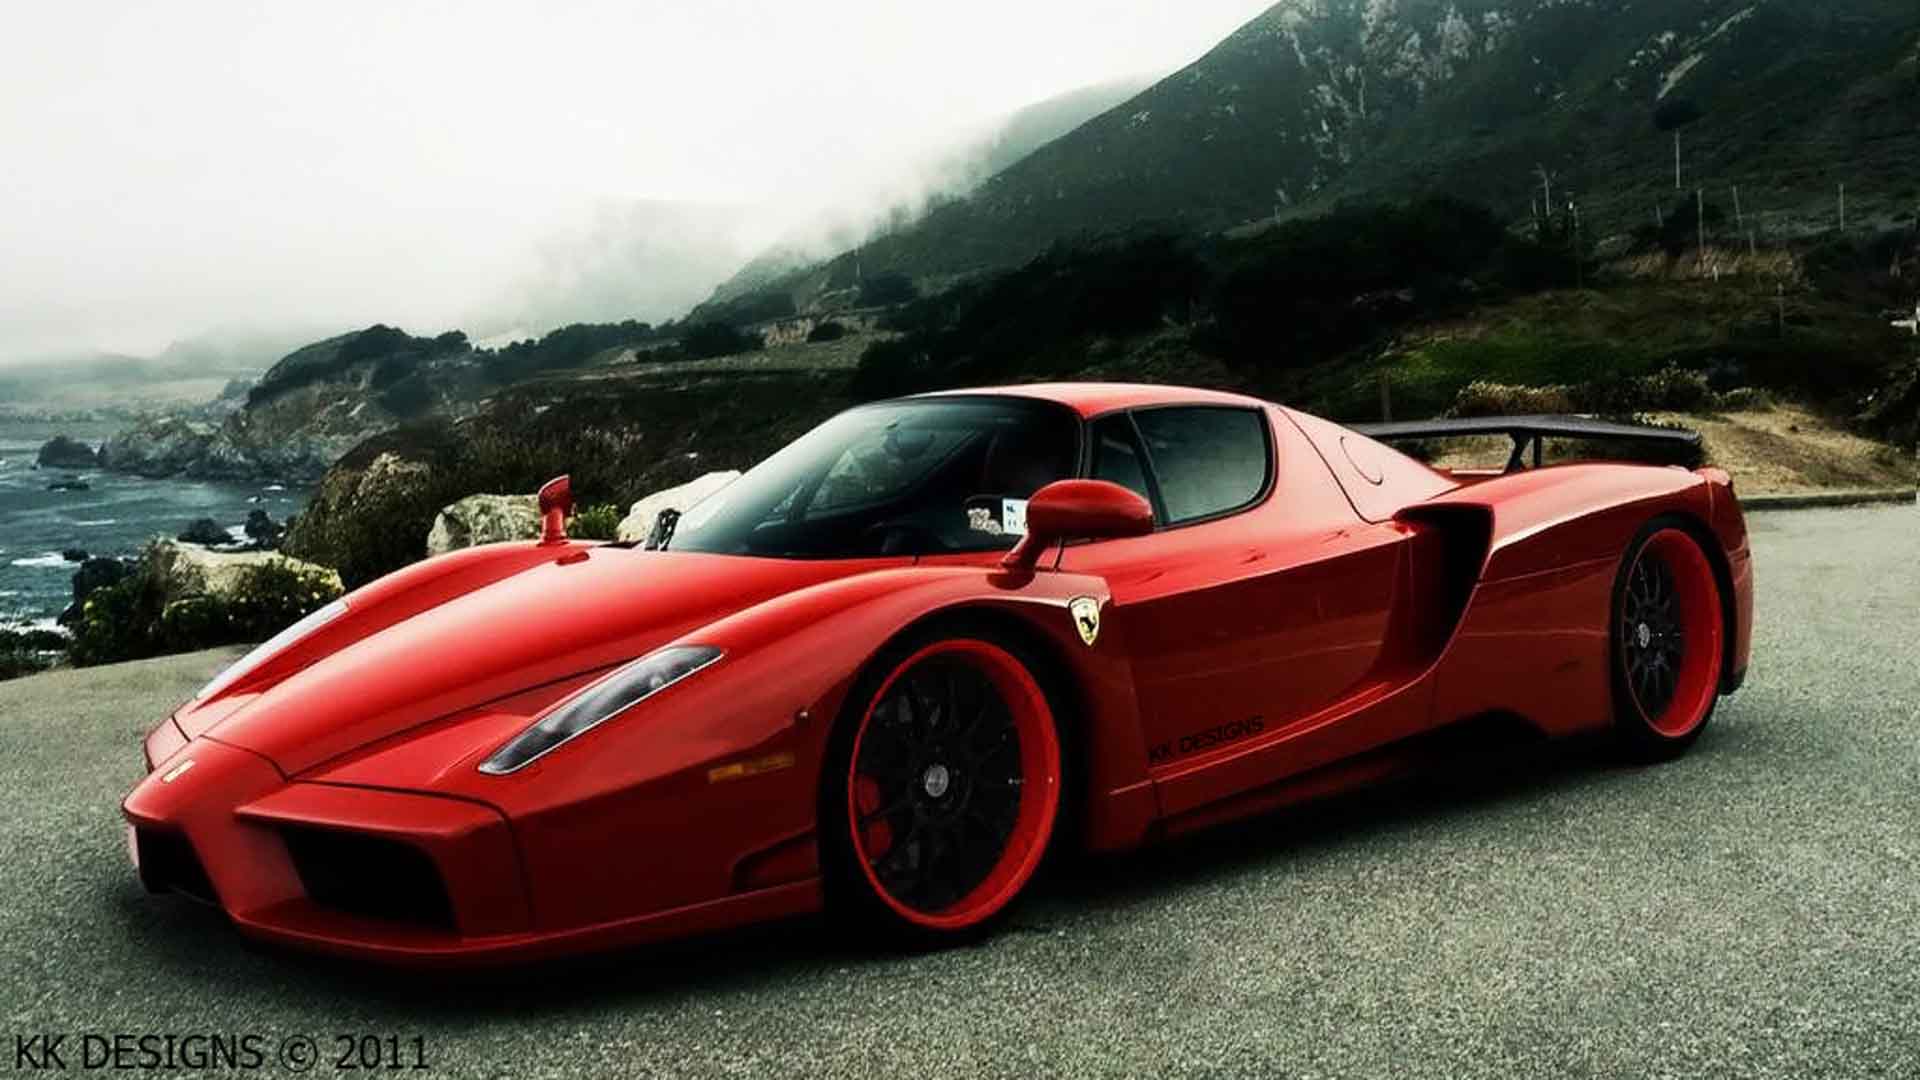 Cool Car Wallpaper, Cool Car Background for PC Ultra HD Super